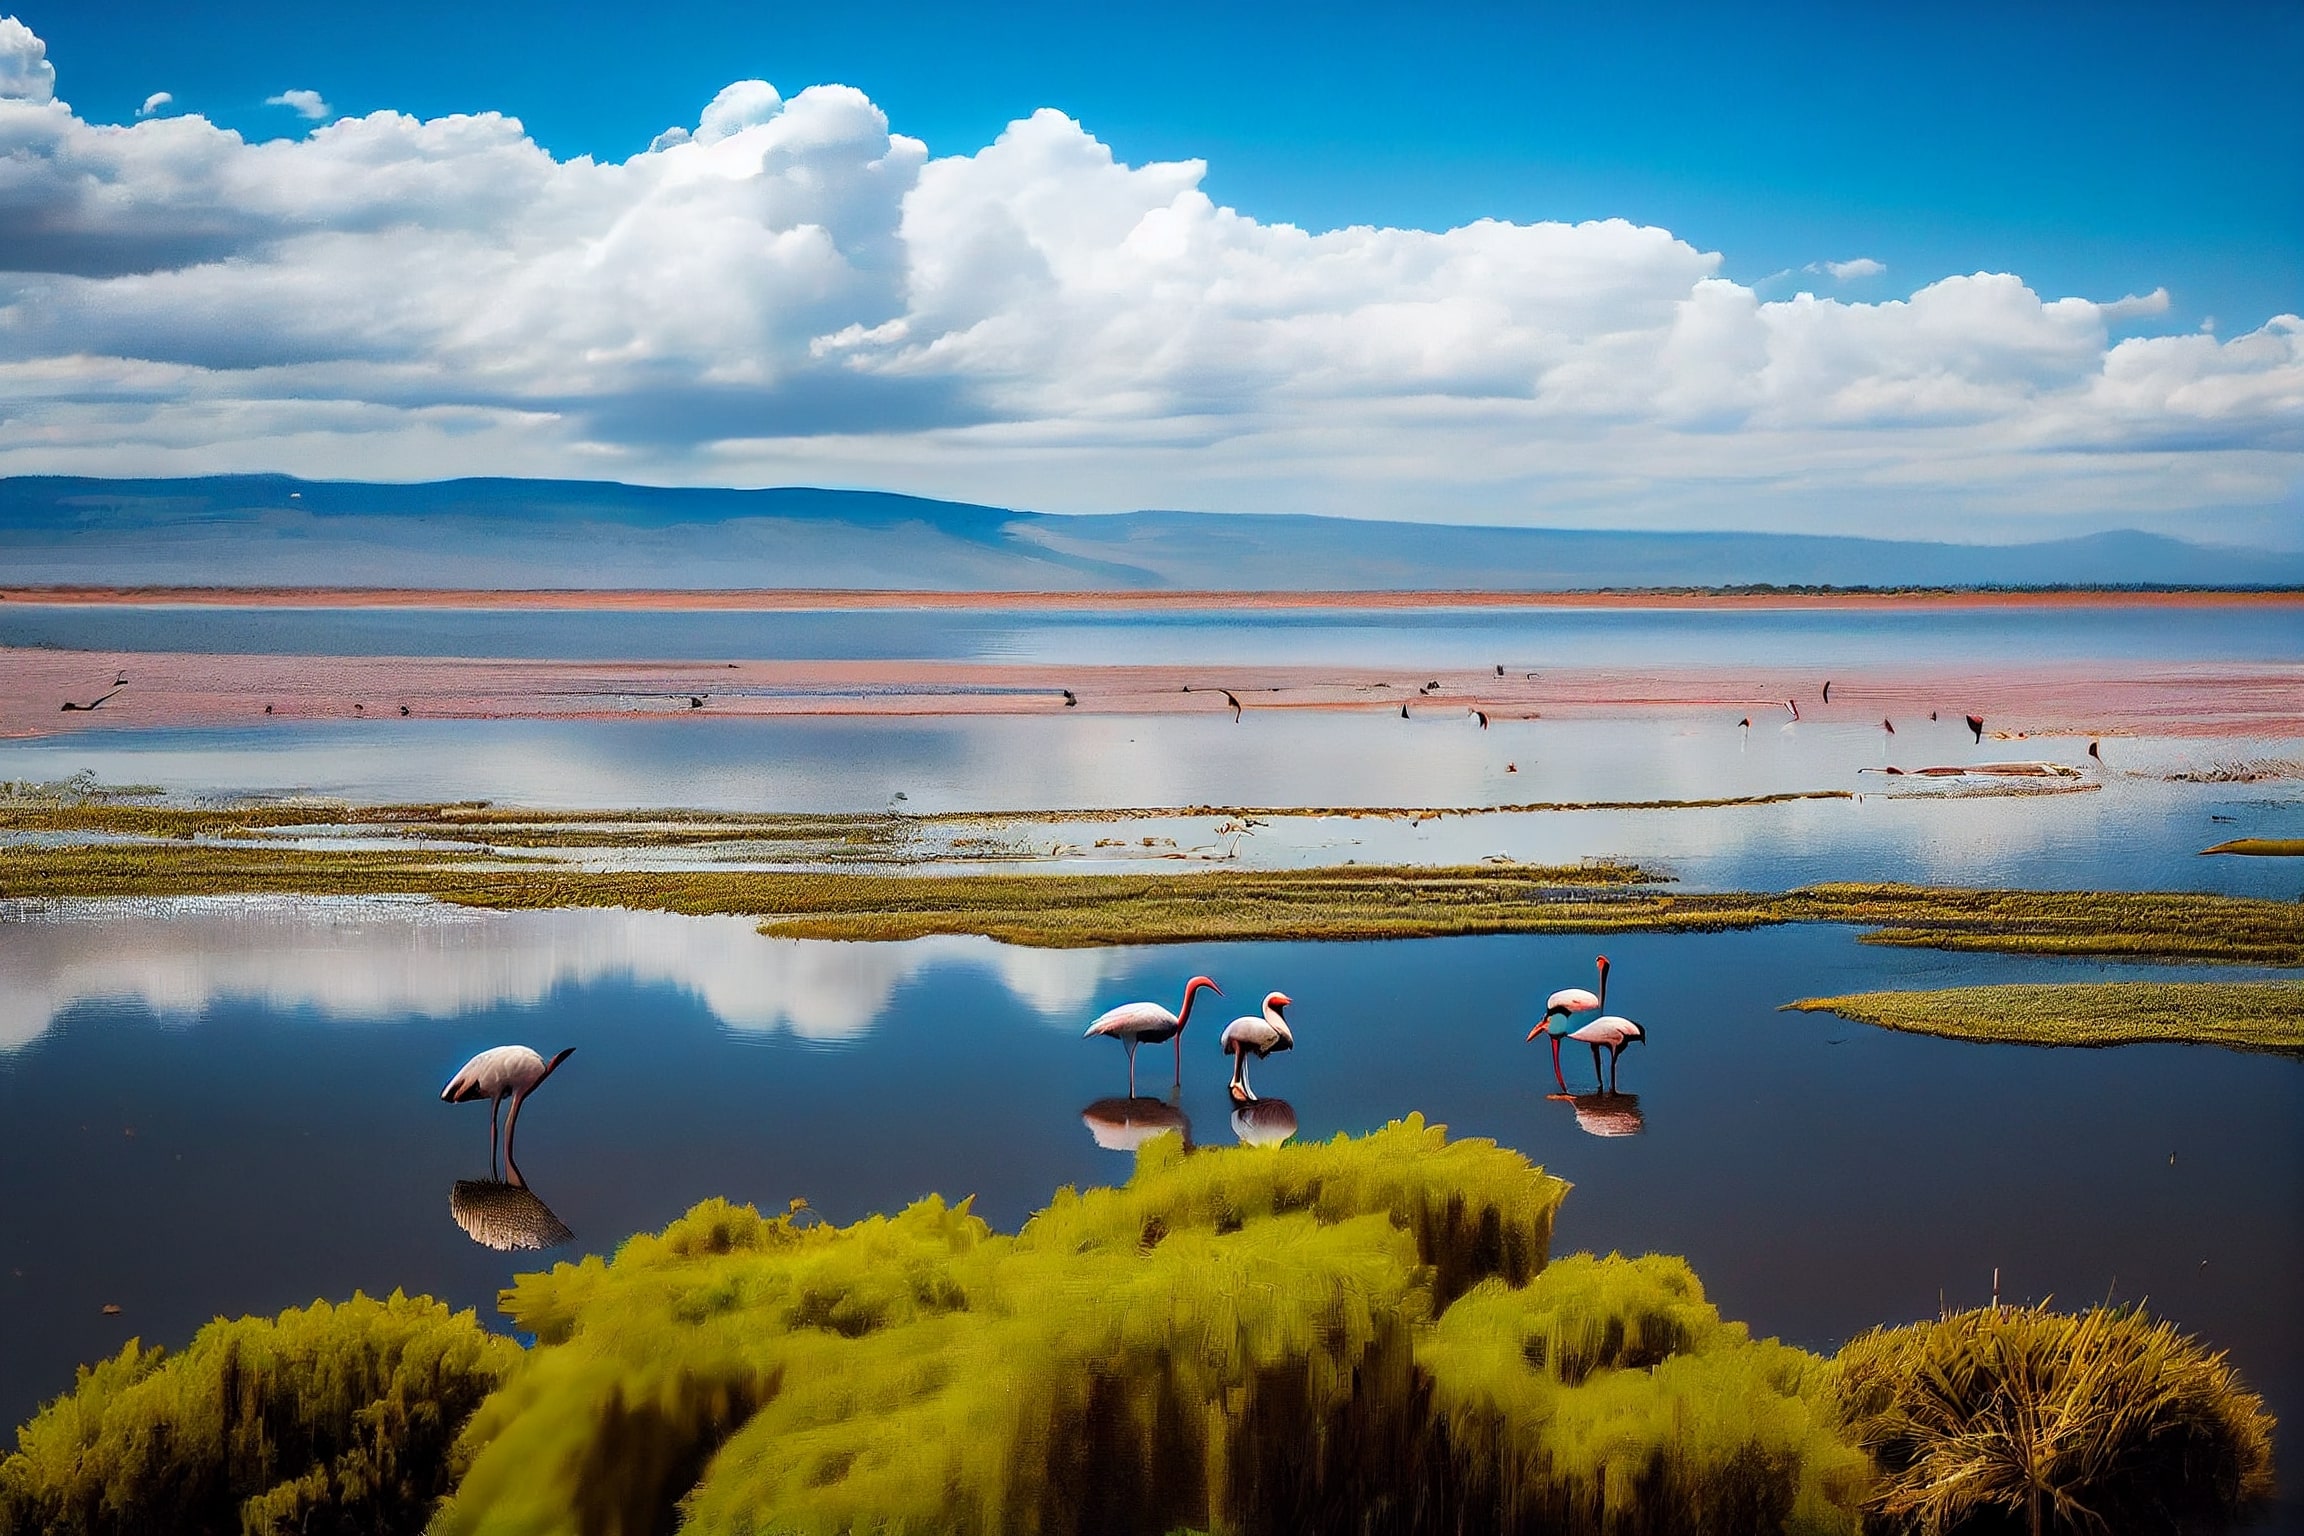 Group of flamingos are standing in the water.